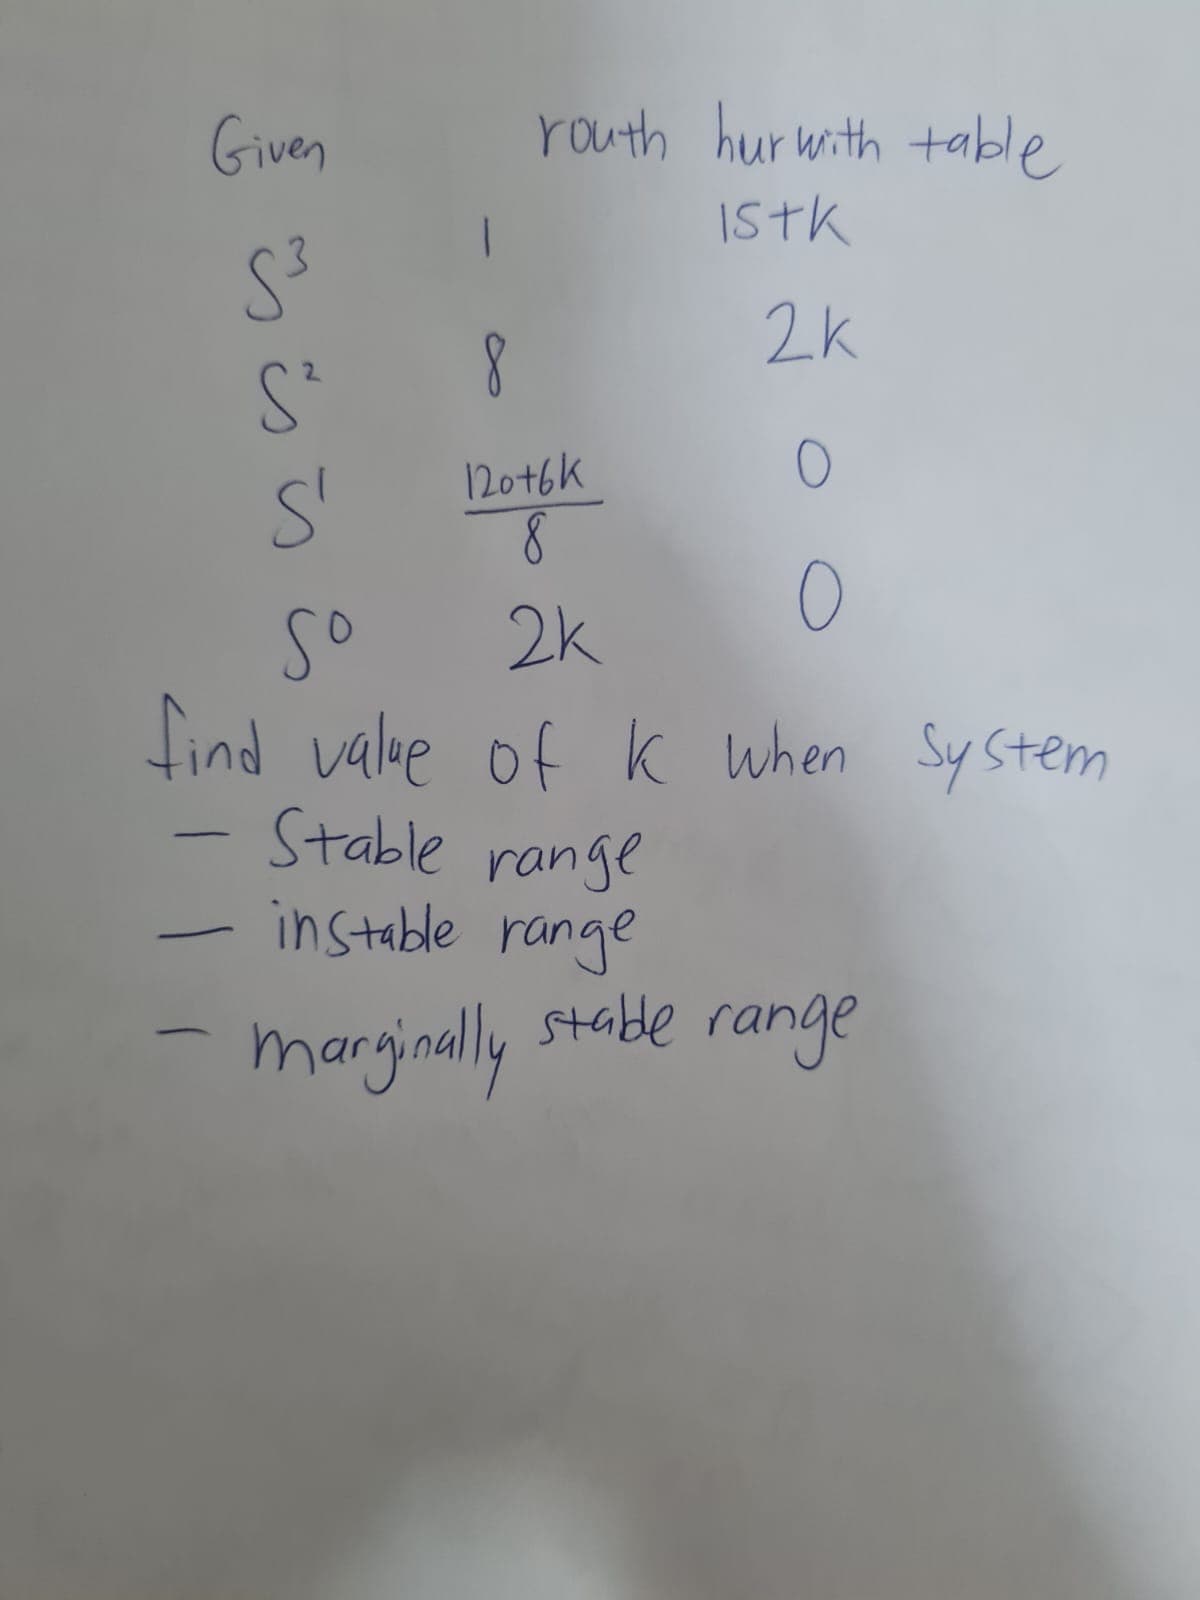 Given
5³
S²
s'
-
routh hur with table
1stk
2k
0
0
so
2k
find value of k when System
-
Stable range
instable range
marginally
stable range
8
120+6k
8